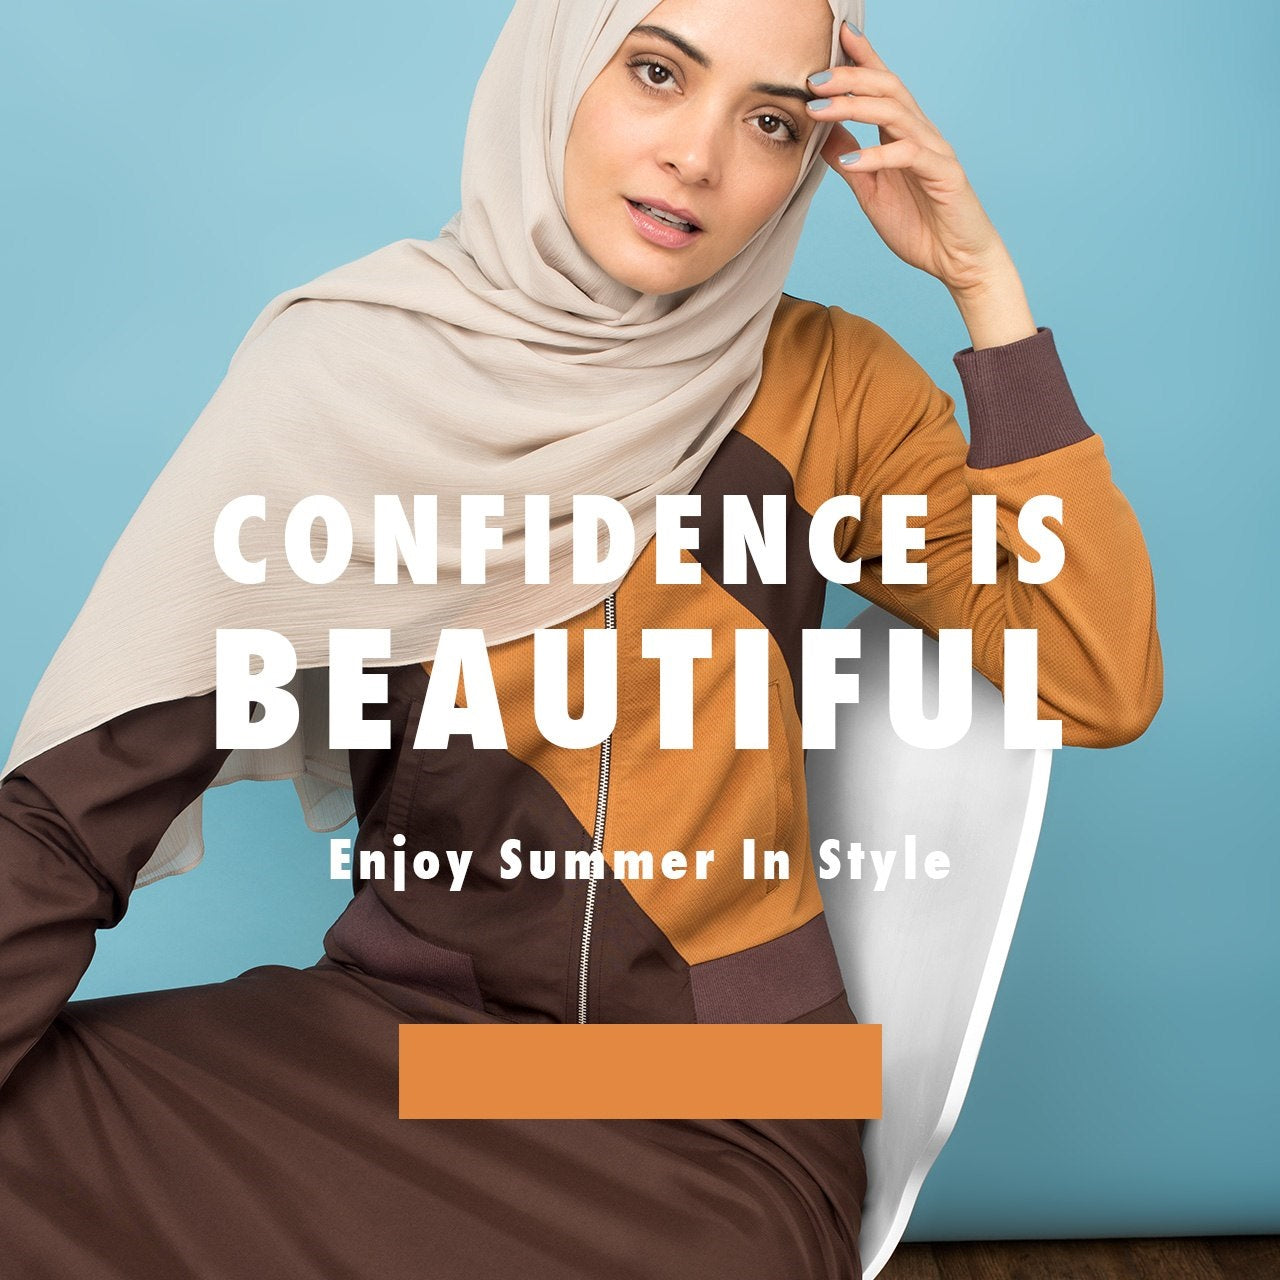 A Modest Islamic Fashion Survival Guide for Summer